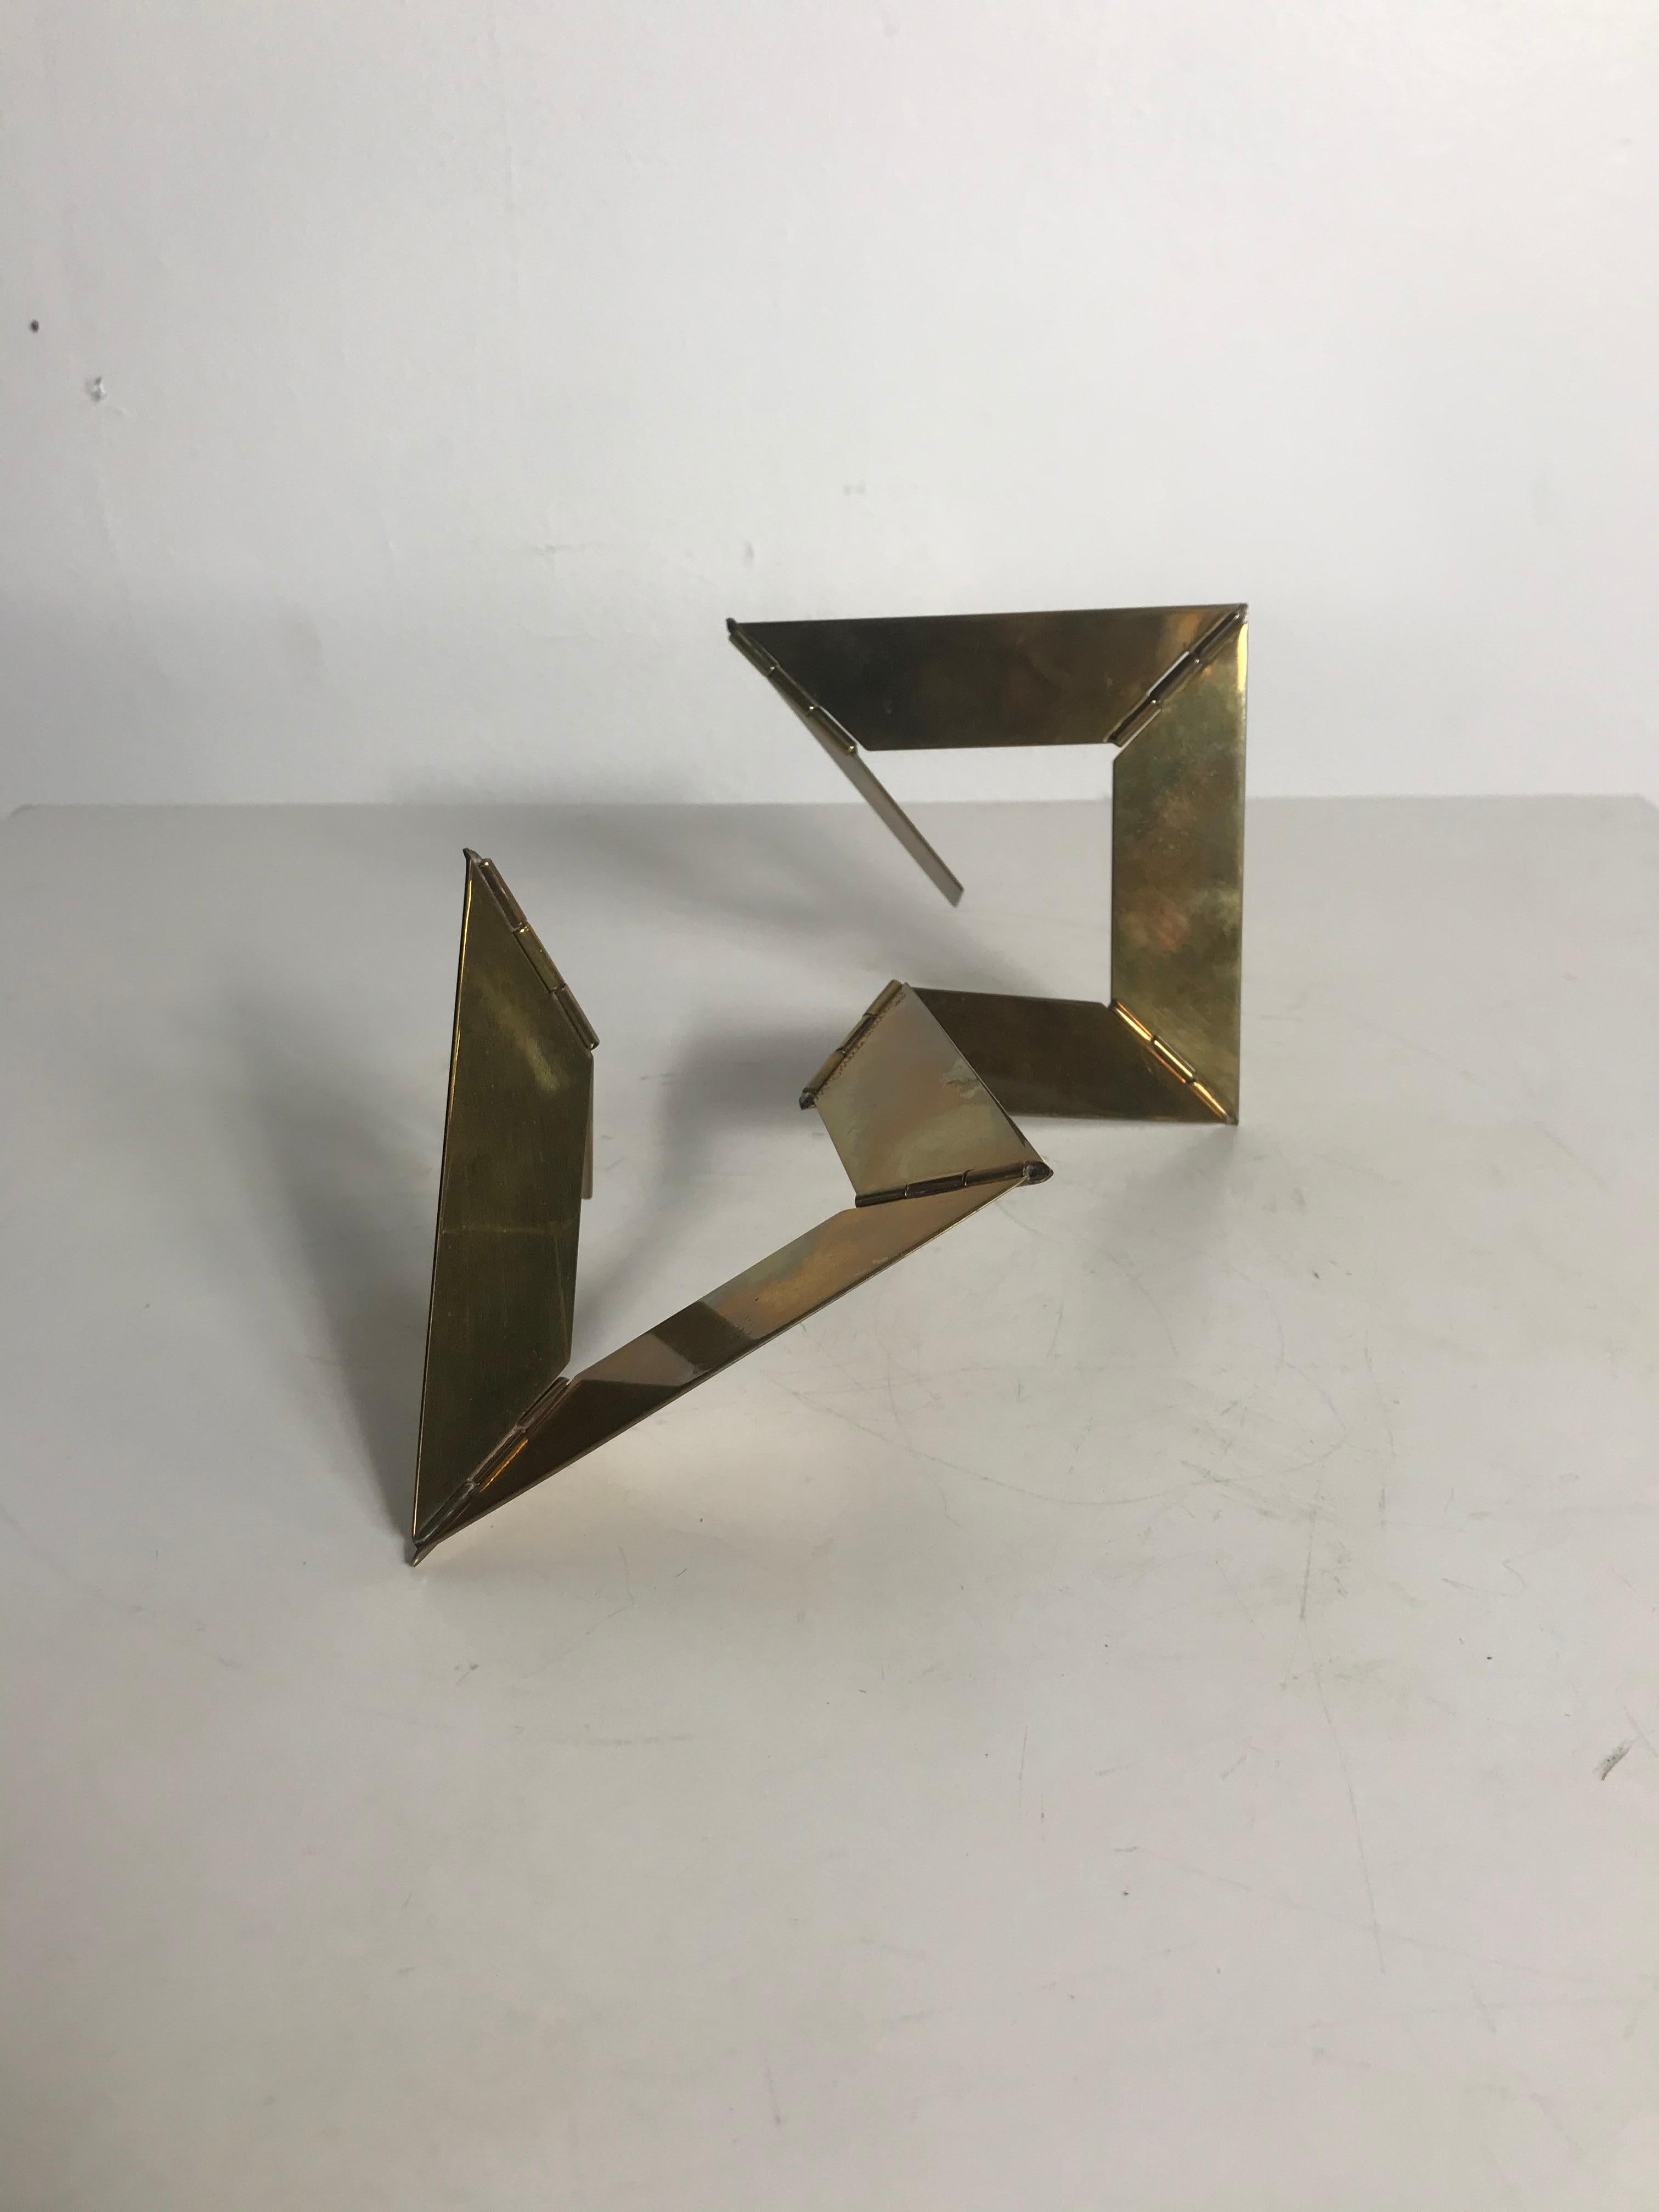 Late 20th Century Merle Steir circa 1976 Modernist Brass Hinged Multi-Position Table Sculpture For Sale